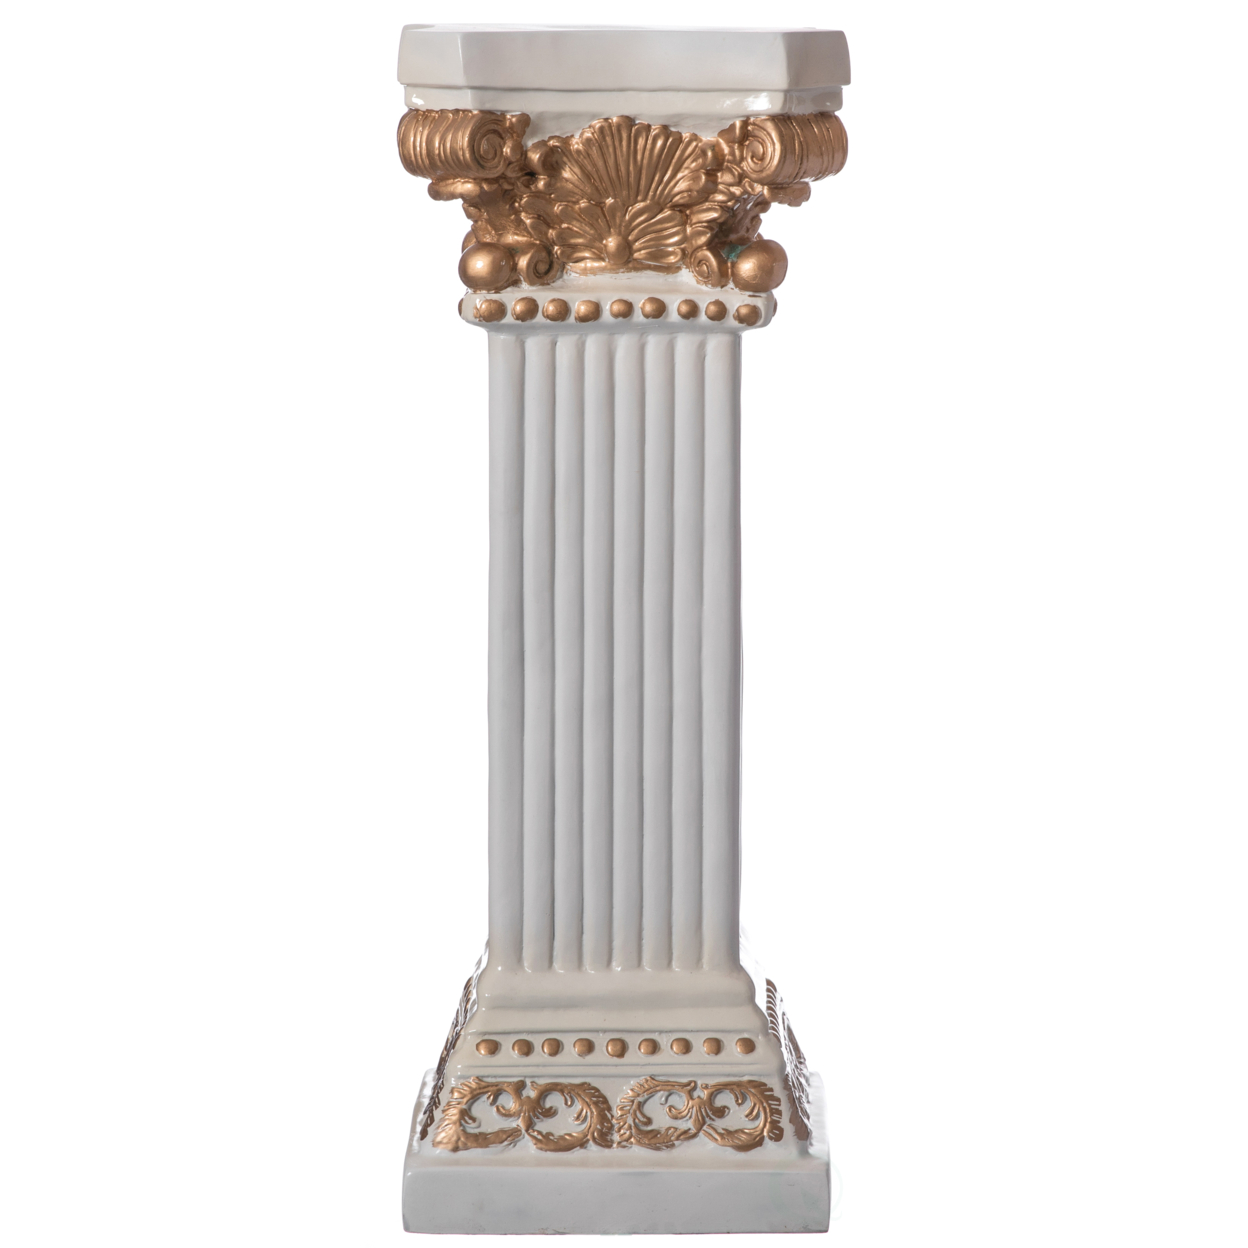 Decorative Modern Fiberglass White And Gold Plinth Roman Style Column Ionic Pedestal Vase Stand For Wedding, Living Room, Or Dining Room - 3